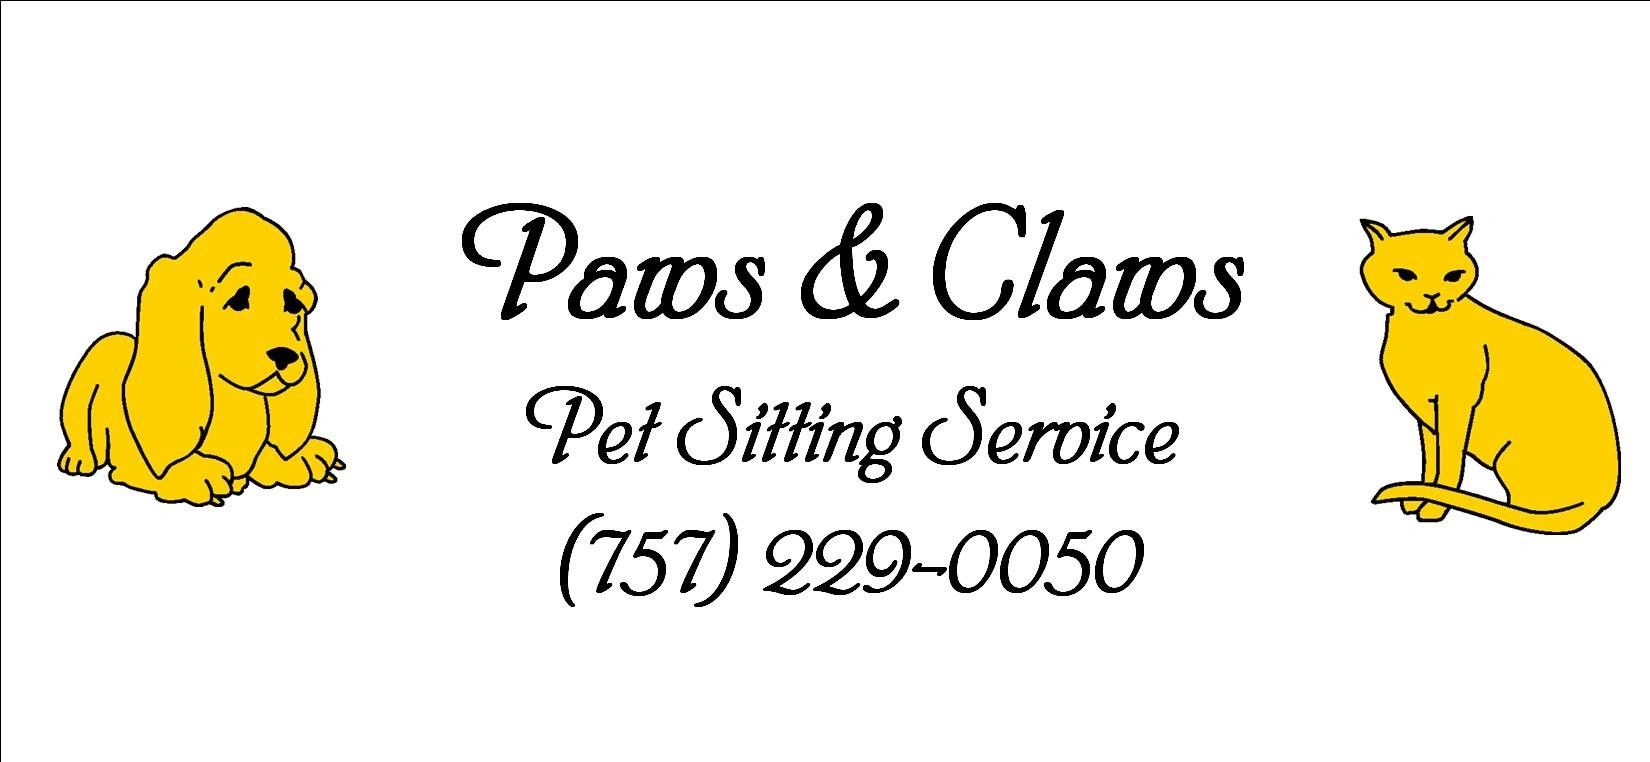 Paws  Claws Pet Sitting Svc